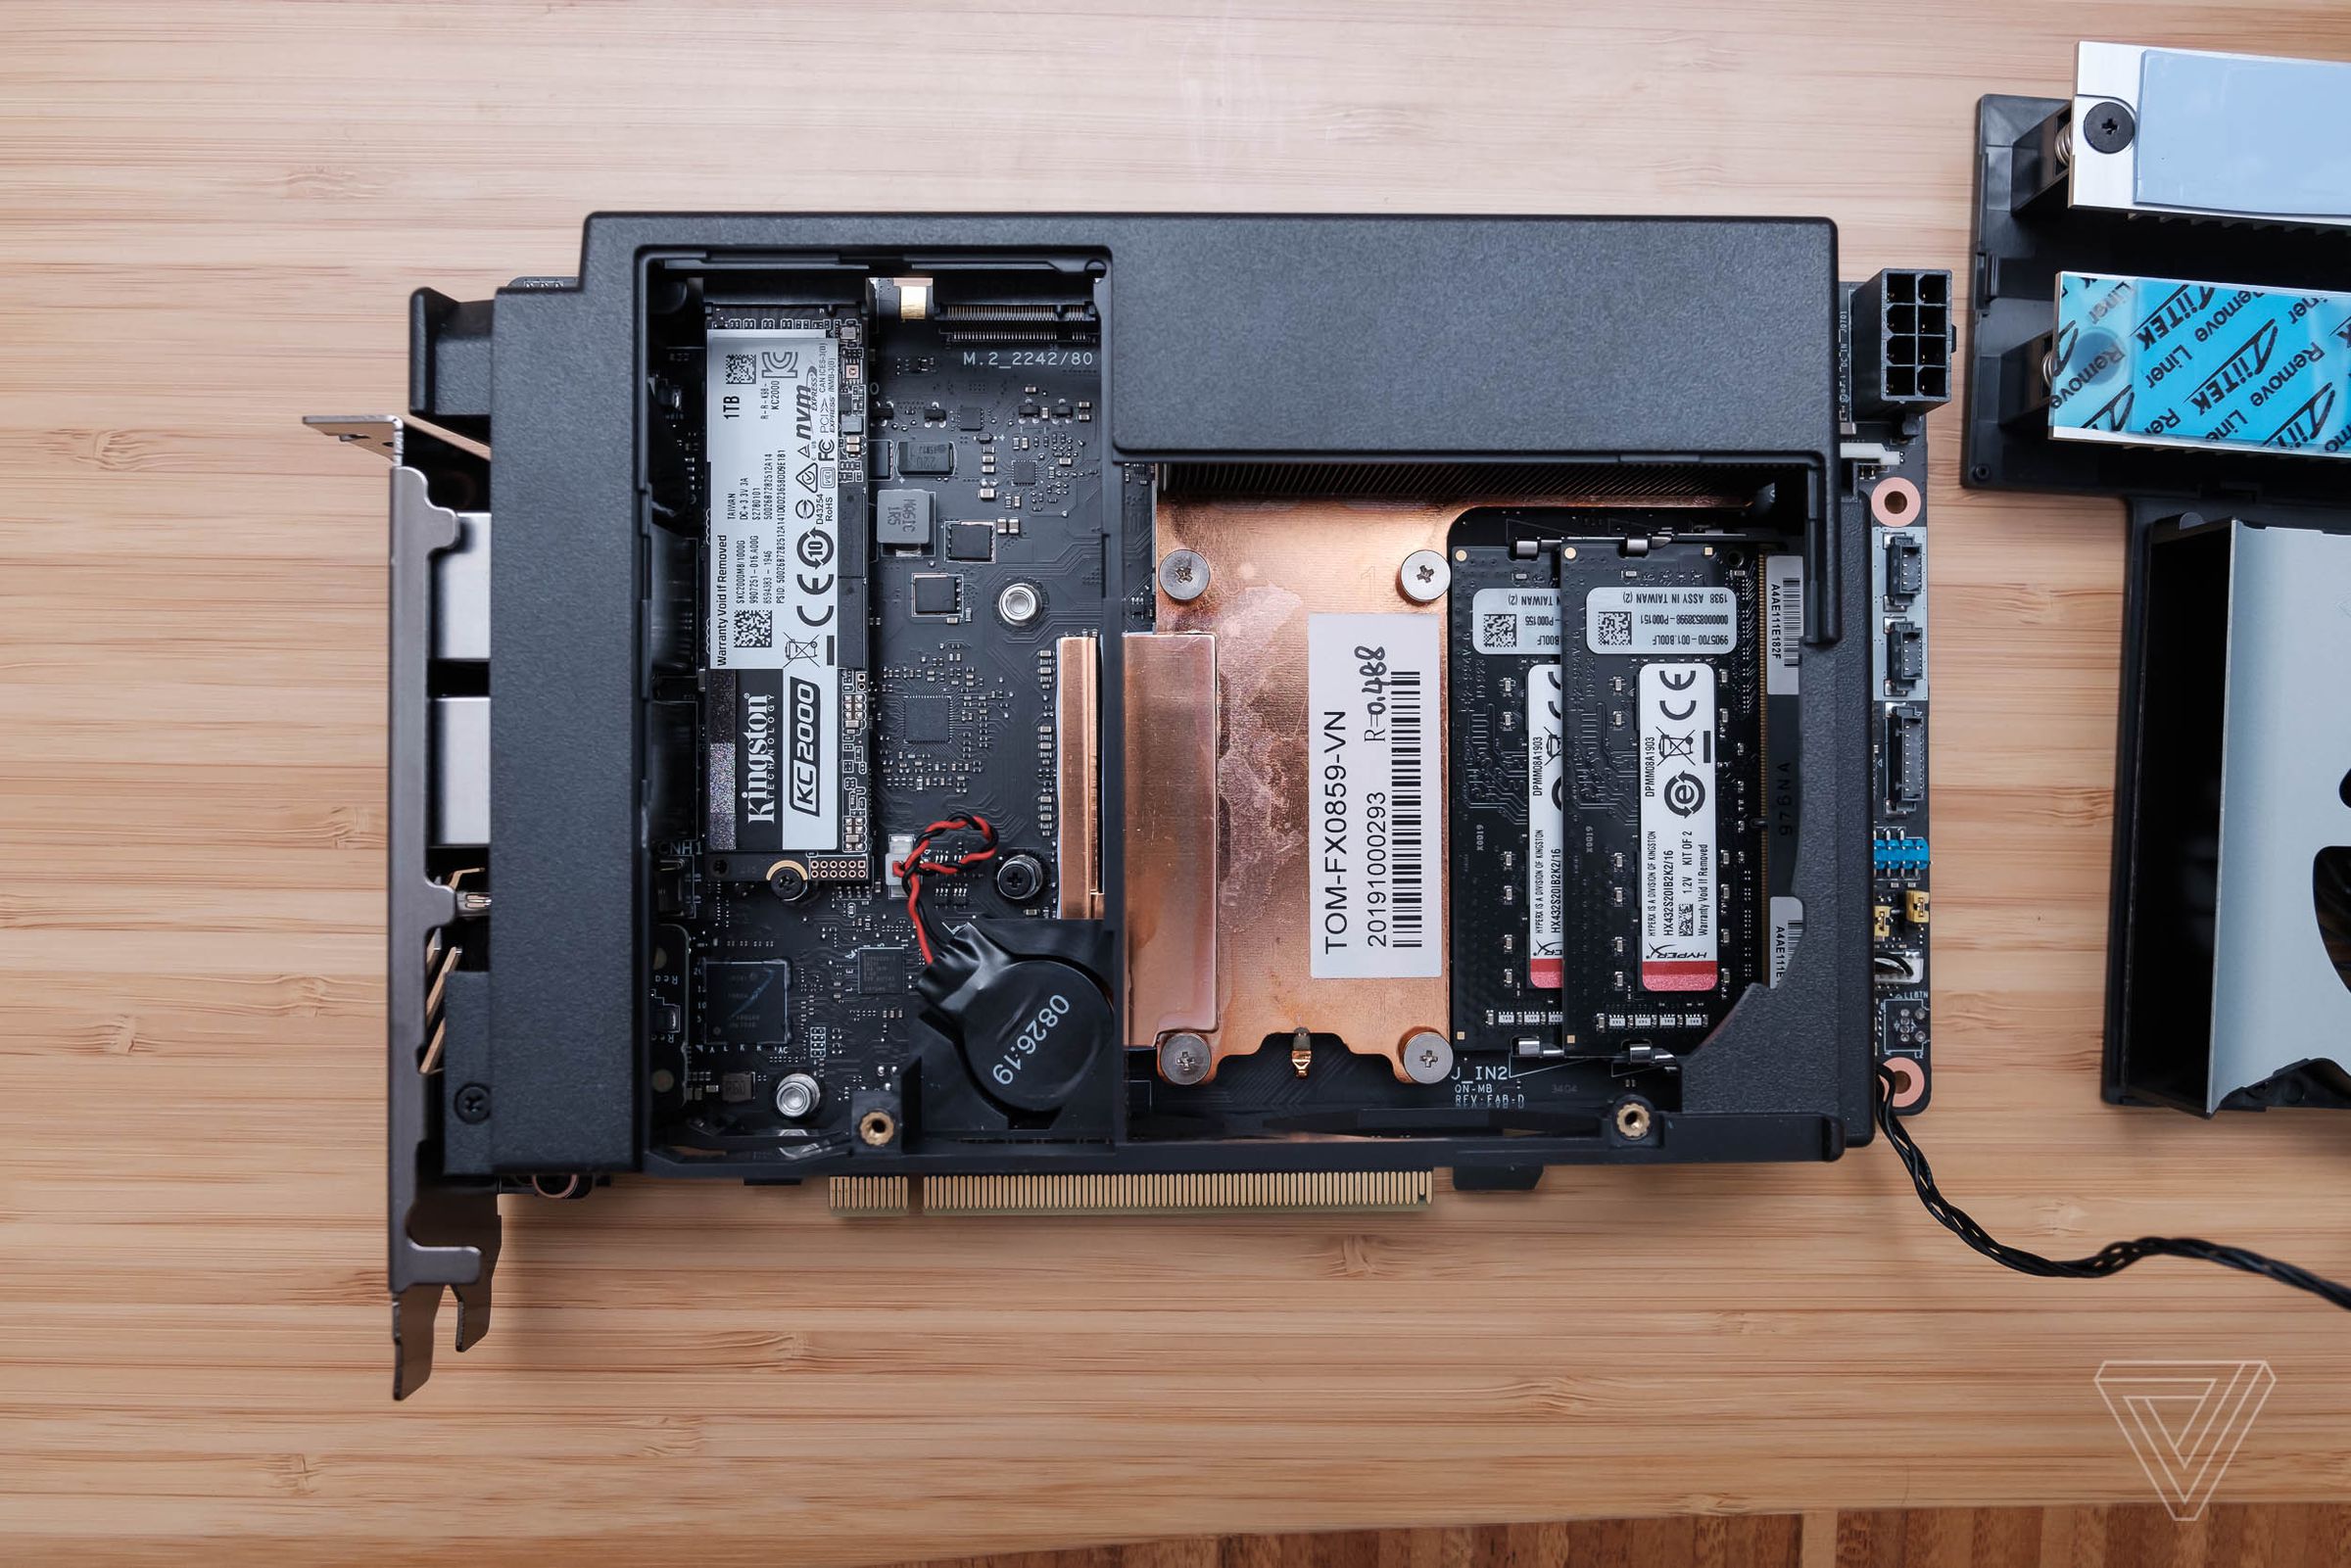 Under a fan is where the CPU, two storage drives, and laptop-size RAM slots are located.